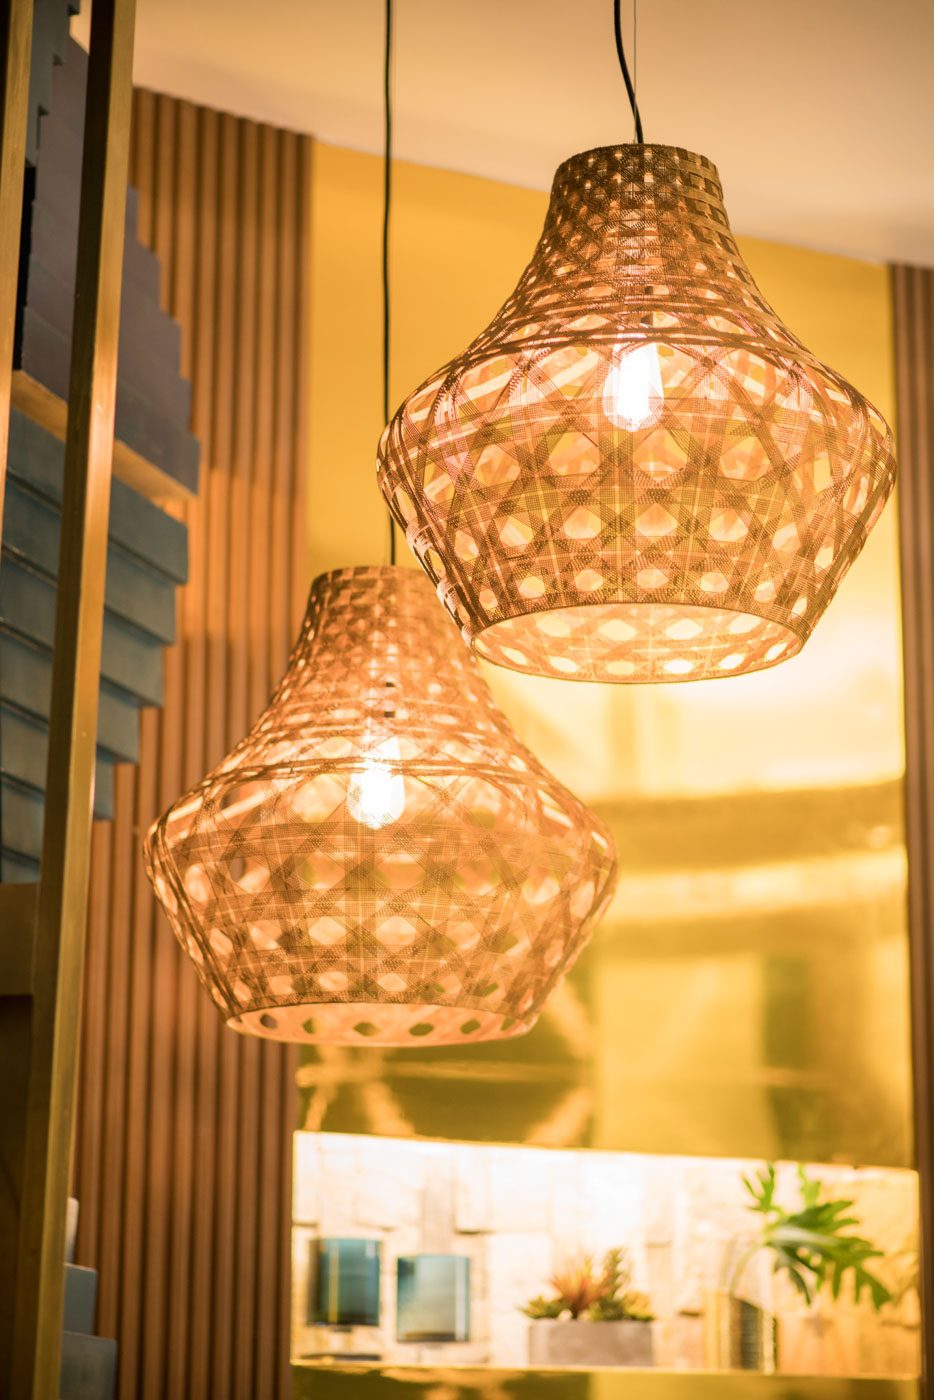 FILIPINO-INSPIRED. These basket-weave light fixtures fit into the Filipino theme perfectly. Photo by Martin San Diego/Rappler 